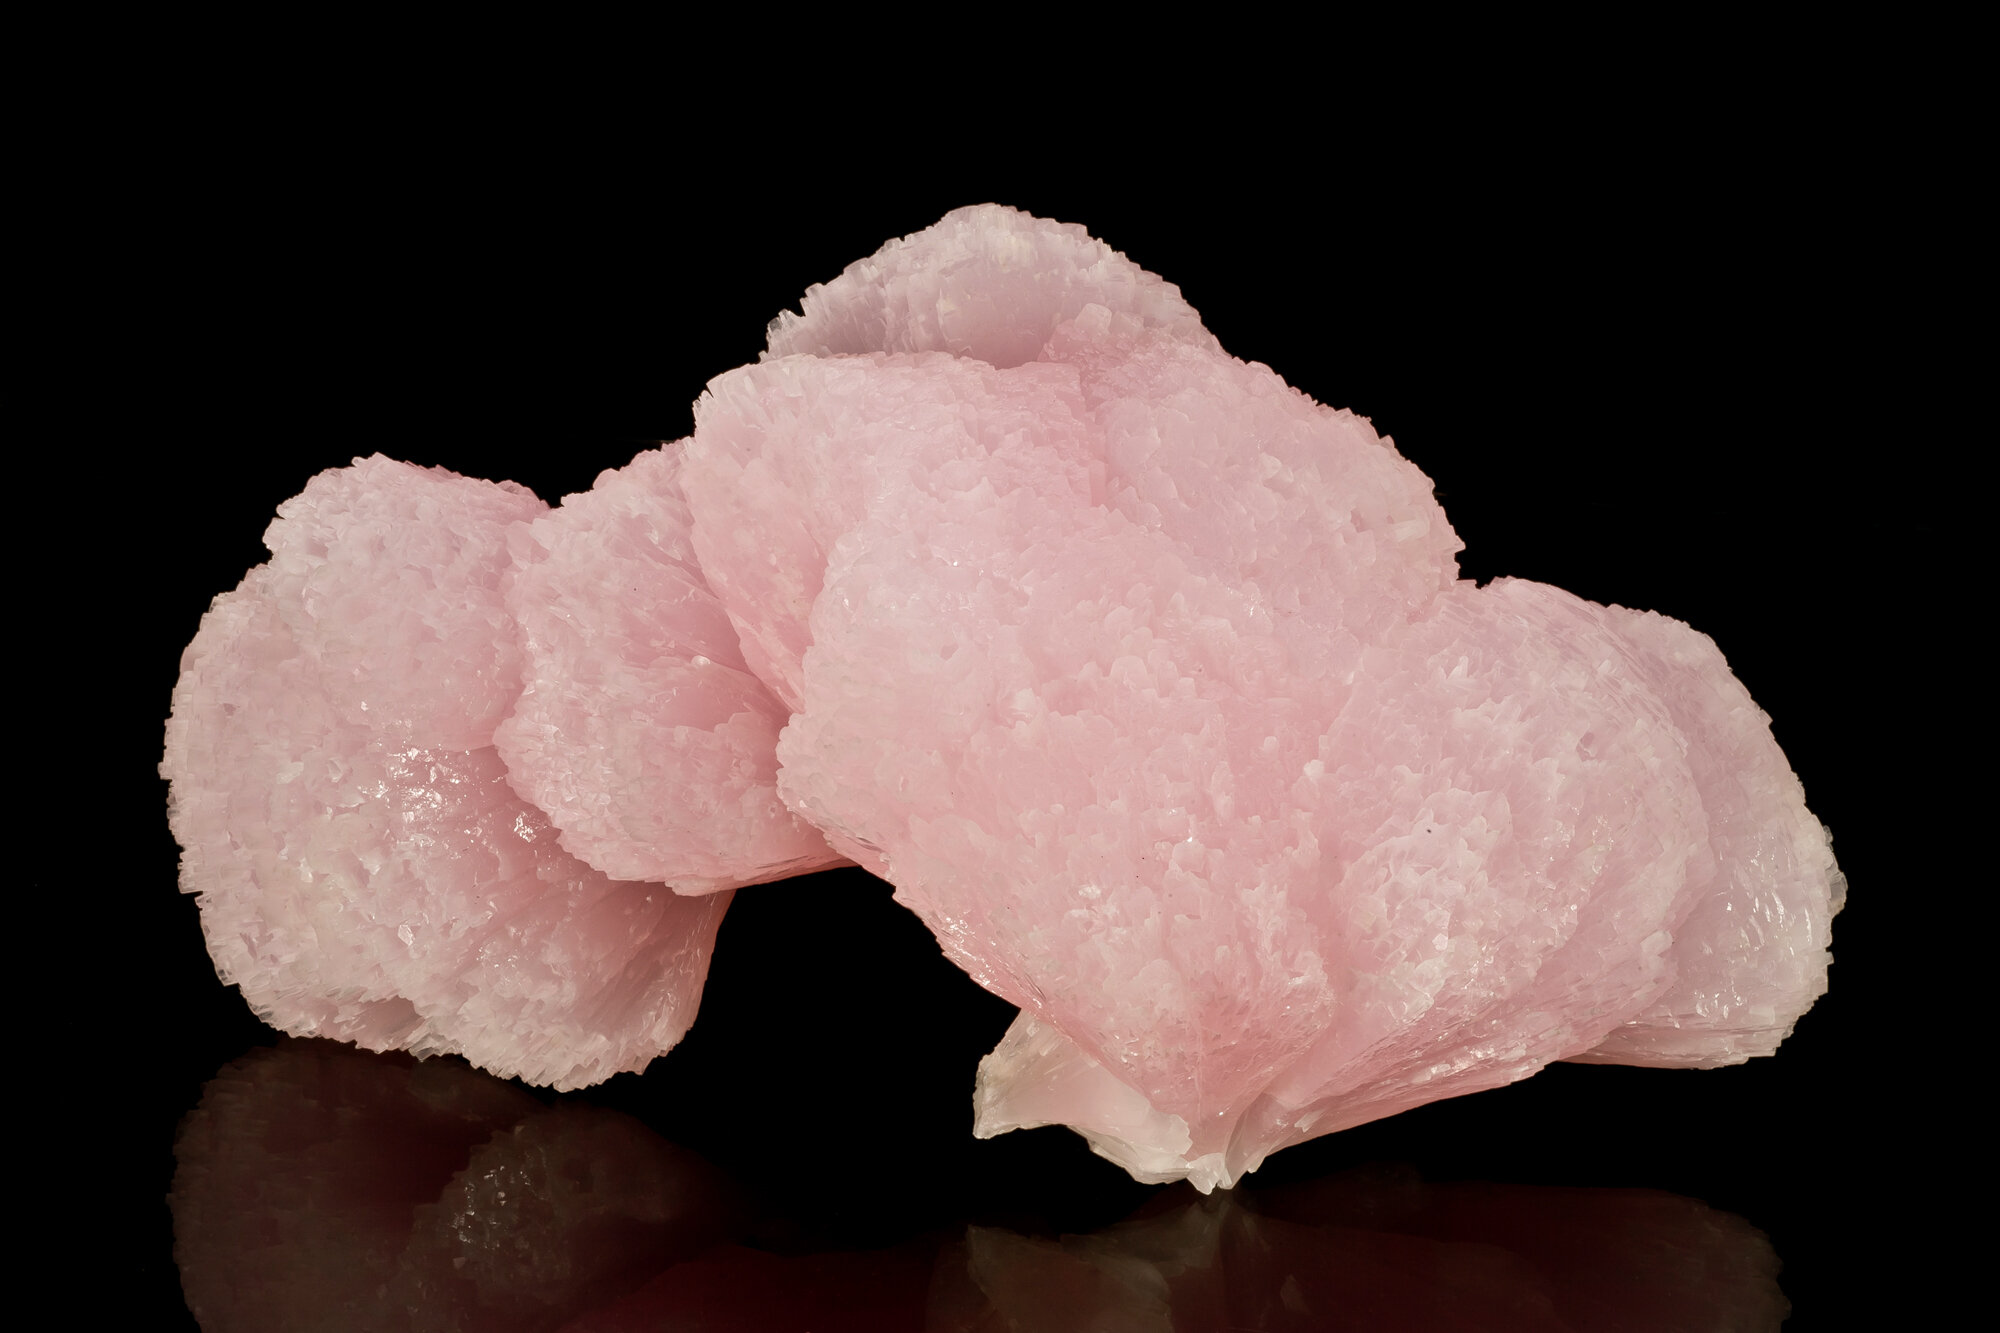  Pink calcite crystal group, 33 cm, from Huanggang mine No. 5, Keshiketeng County, Chifeng Prefecture, Inner Mongolia Autonomous Region, China. Found in 2010. 